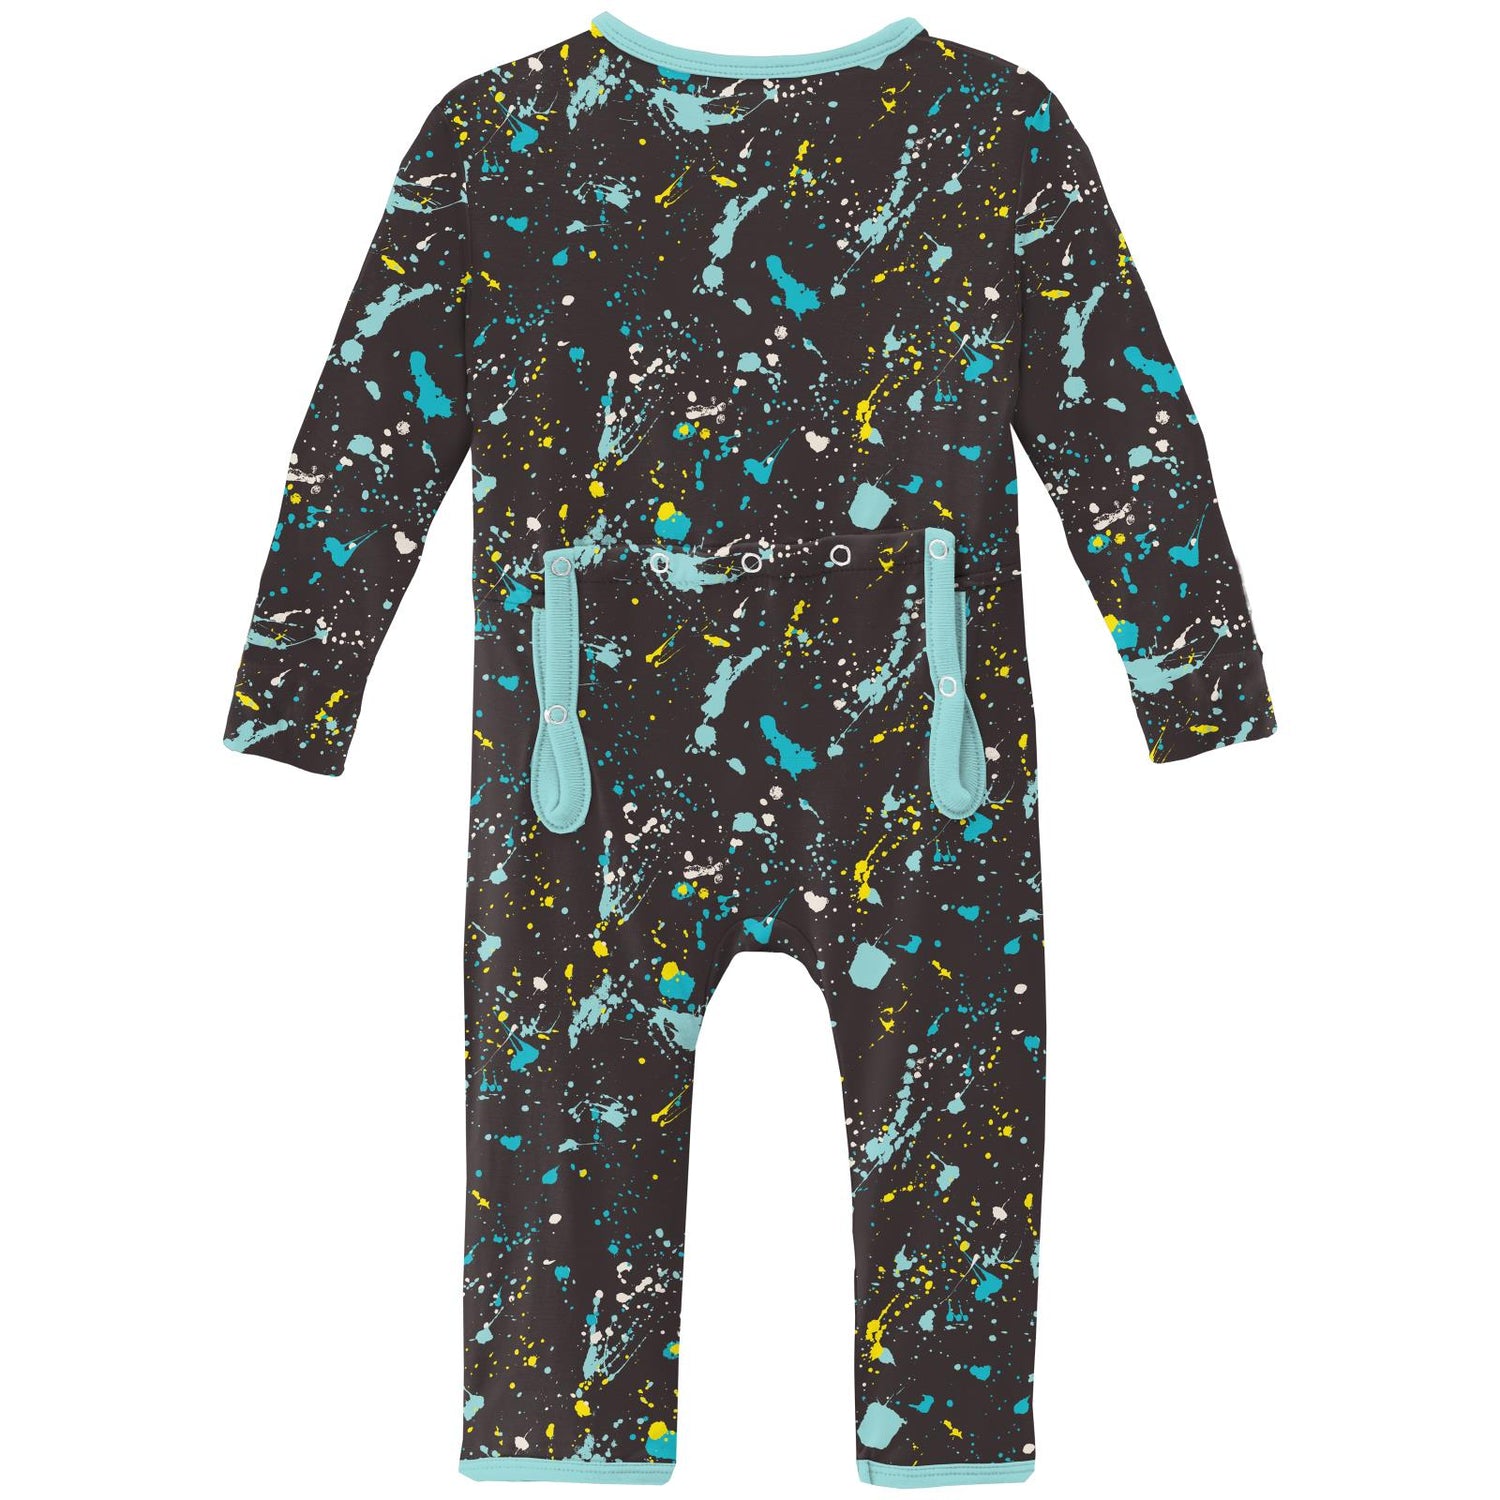 Print Coverall with 2 Way Zipper in Confetti Splatter Paint